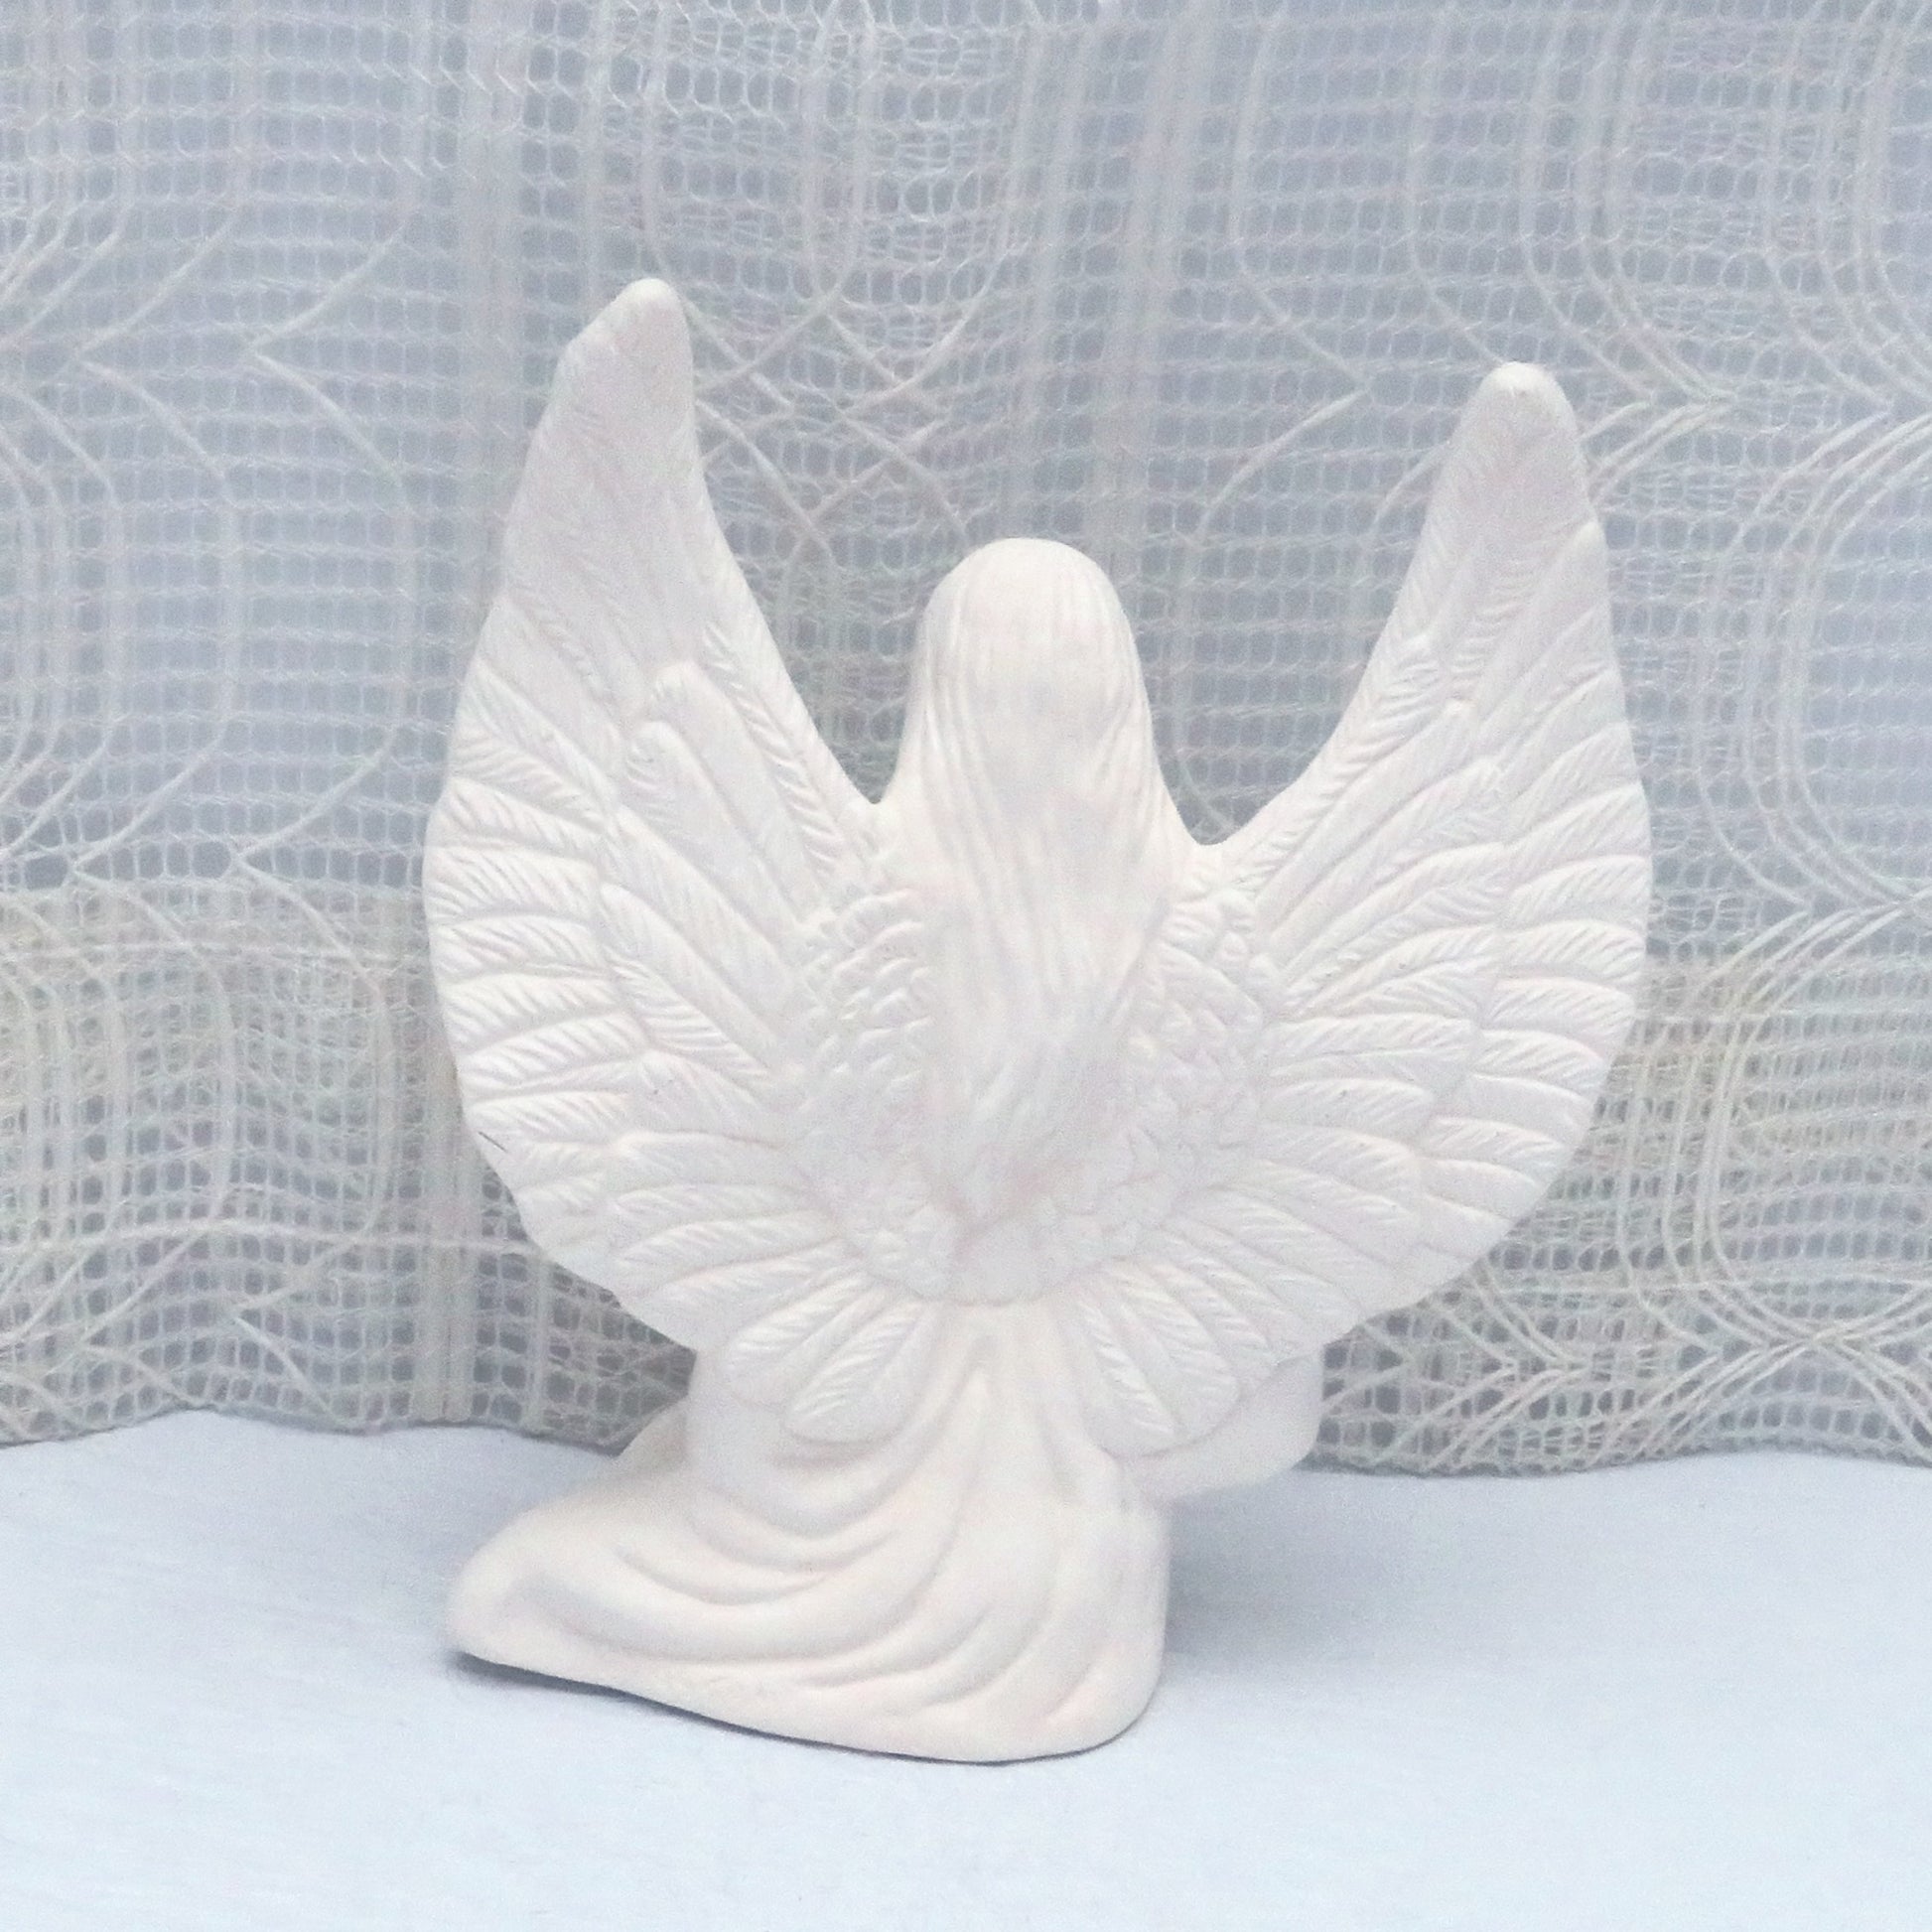 Rear view of unpainted ceramic angel figurine showing wings, long hair, and tunic.